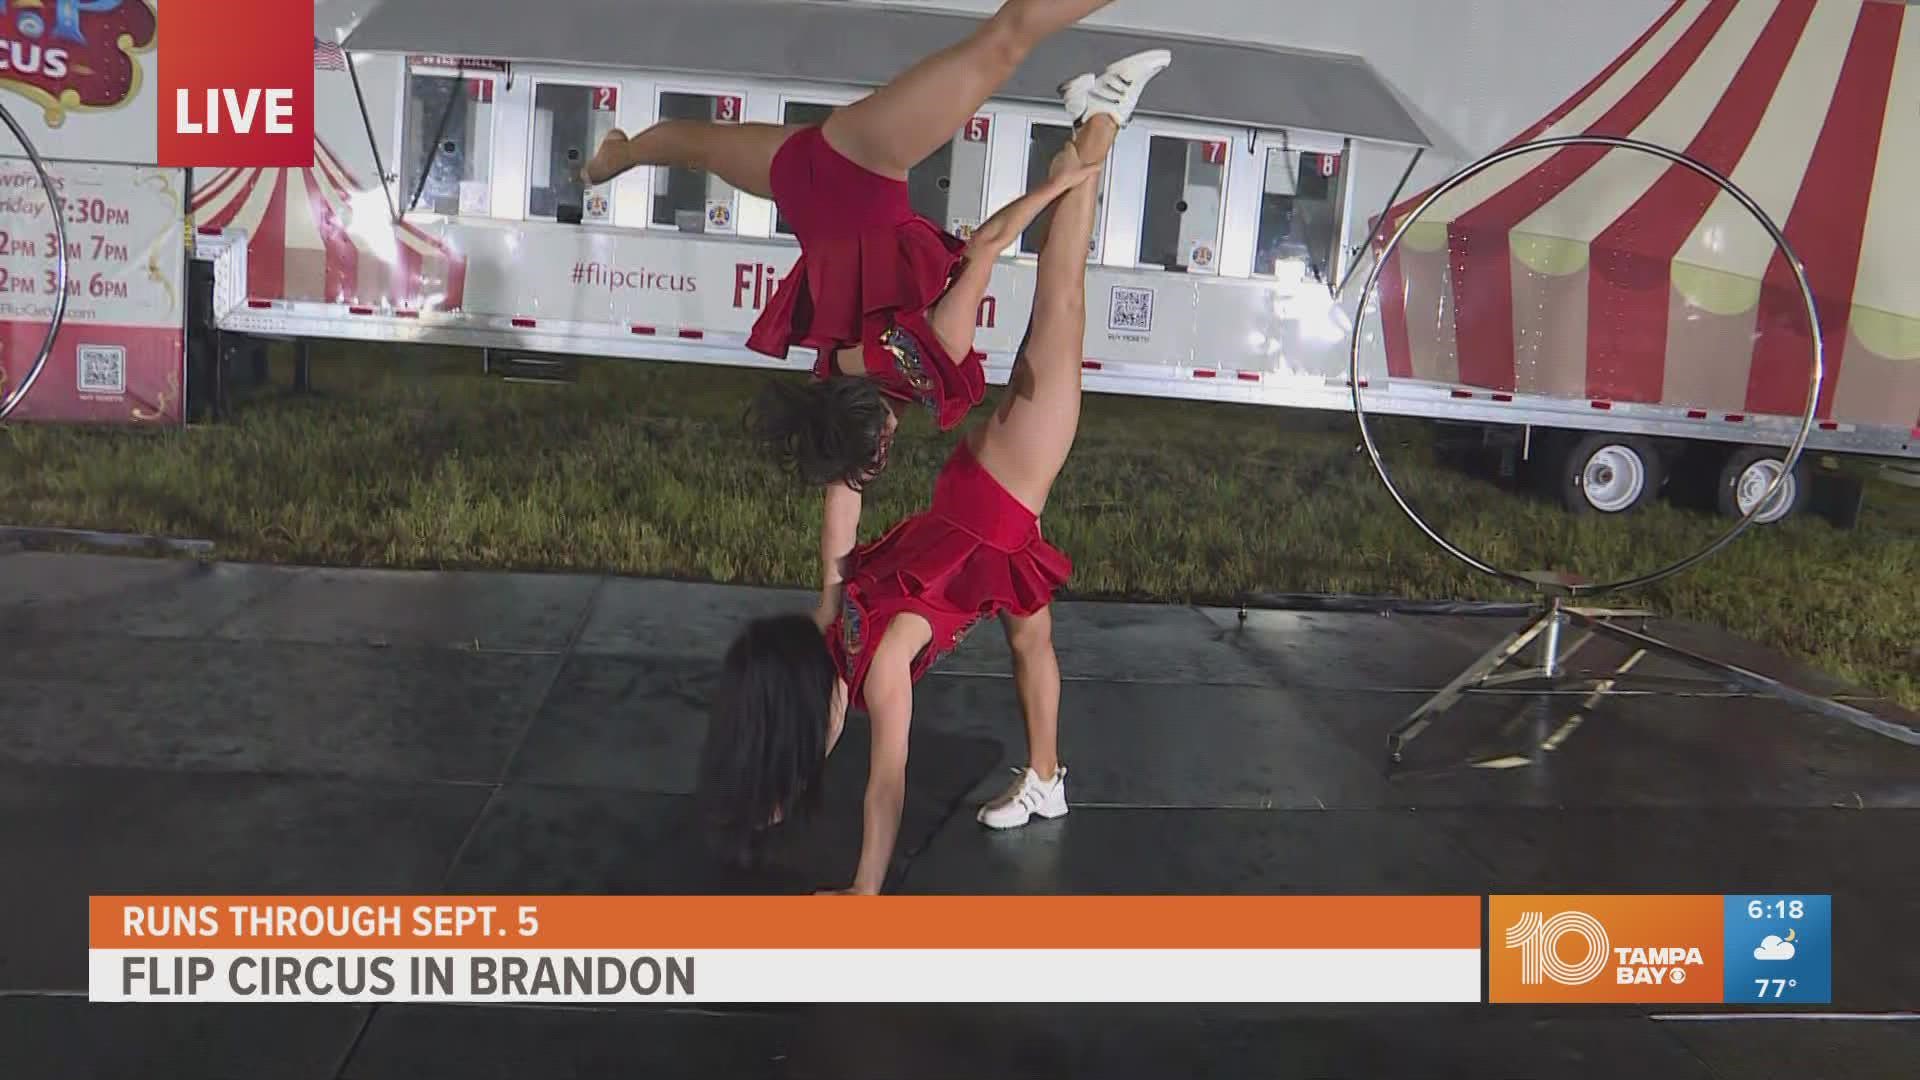 Flip Circus has shows at Westfield Brandon from Aug. 19-29.